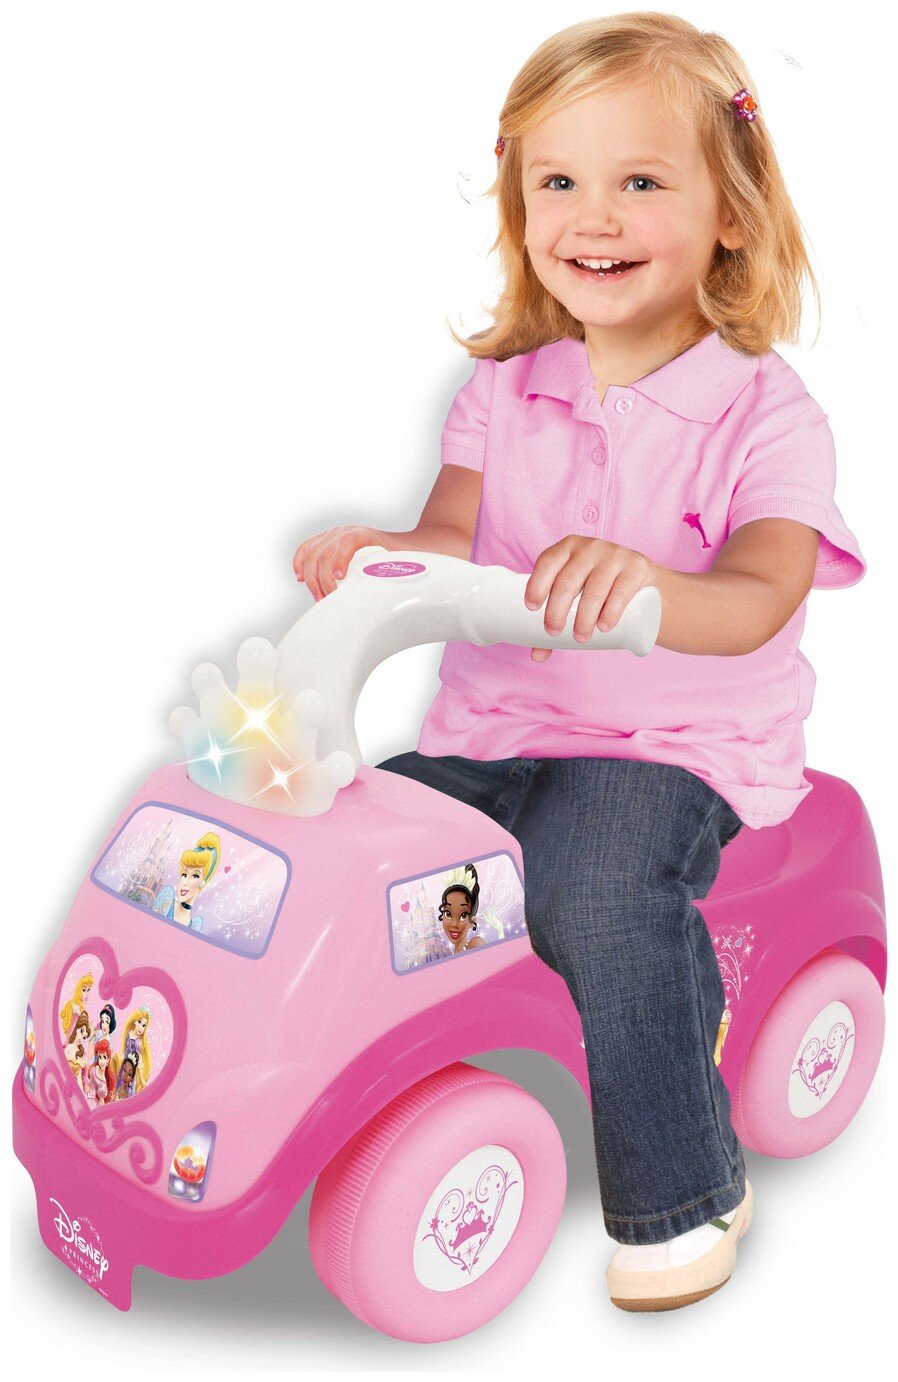 Disney Princess Lights and Sounds Activity Ride On